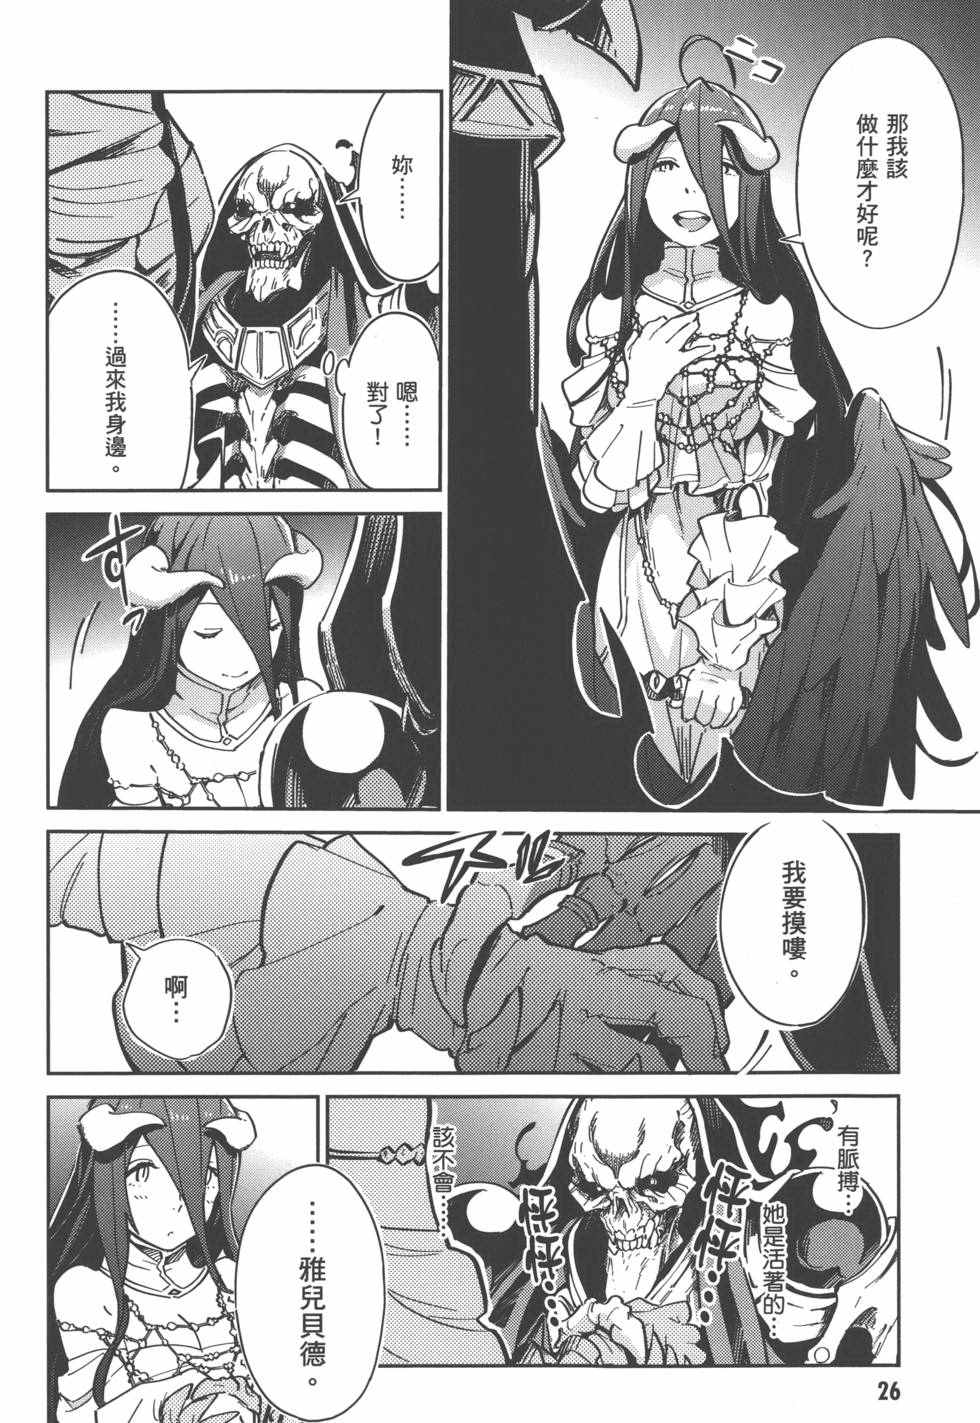 OVERLORD - 第1卷(1/4) - 4